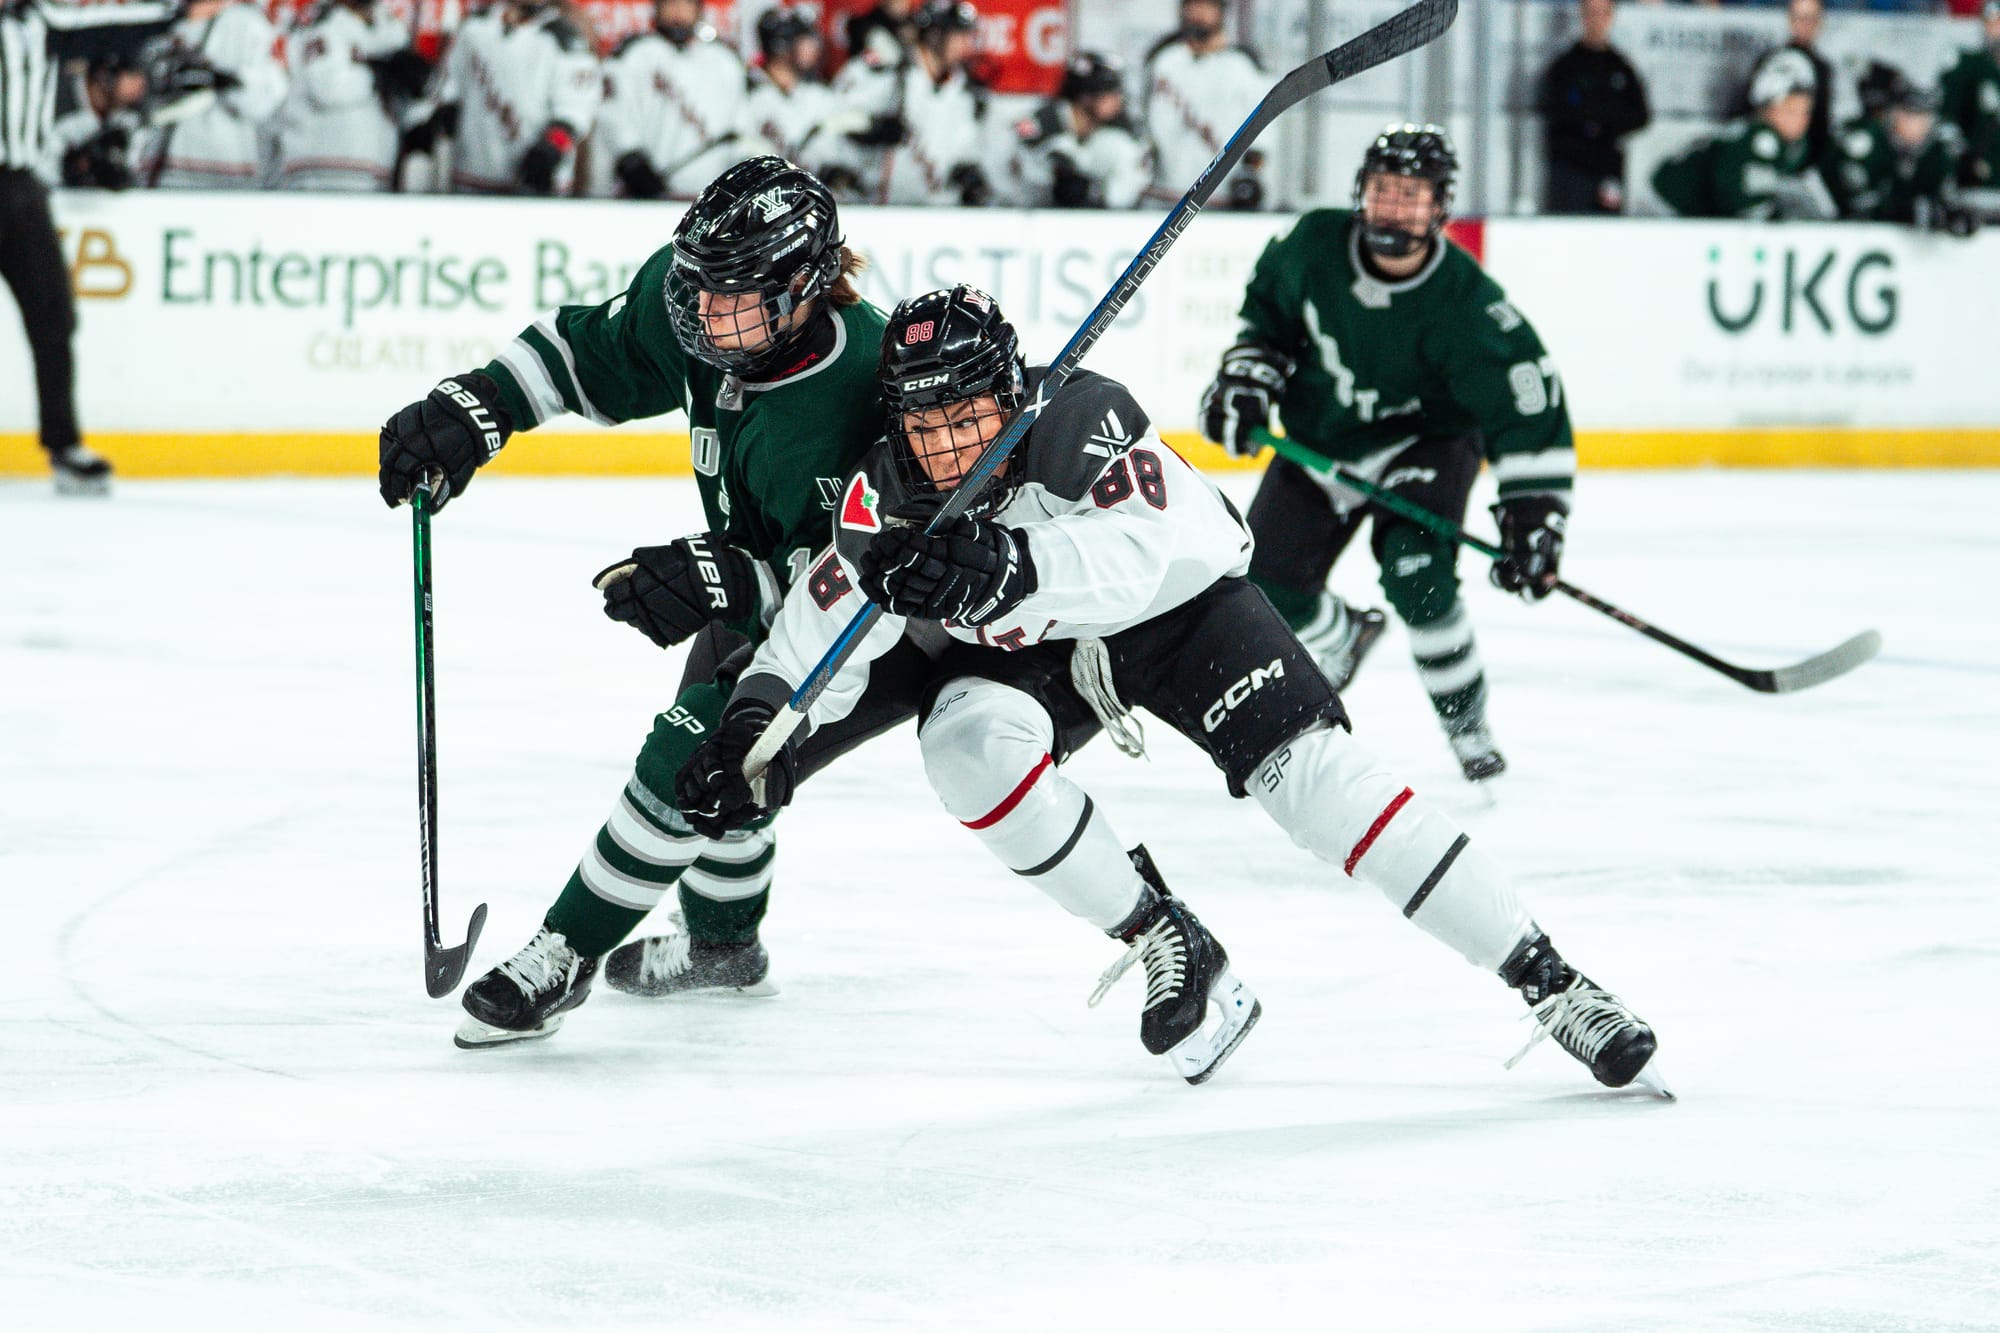 Alina Müller and Lexie Adzija battle for positioning as they hunt the puck. They are leaning into each other and both hunched over, with Müller on the left. Müller is in her green home uniform, while Adzija is in white.